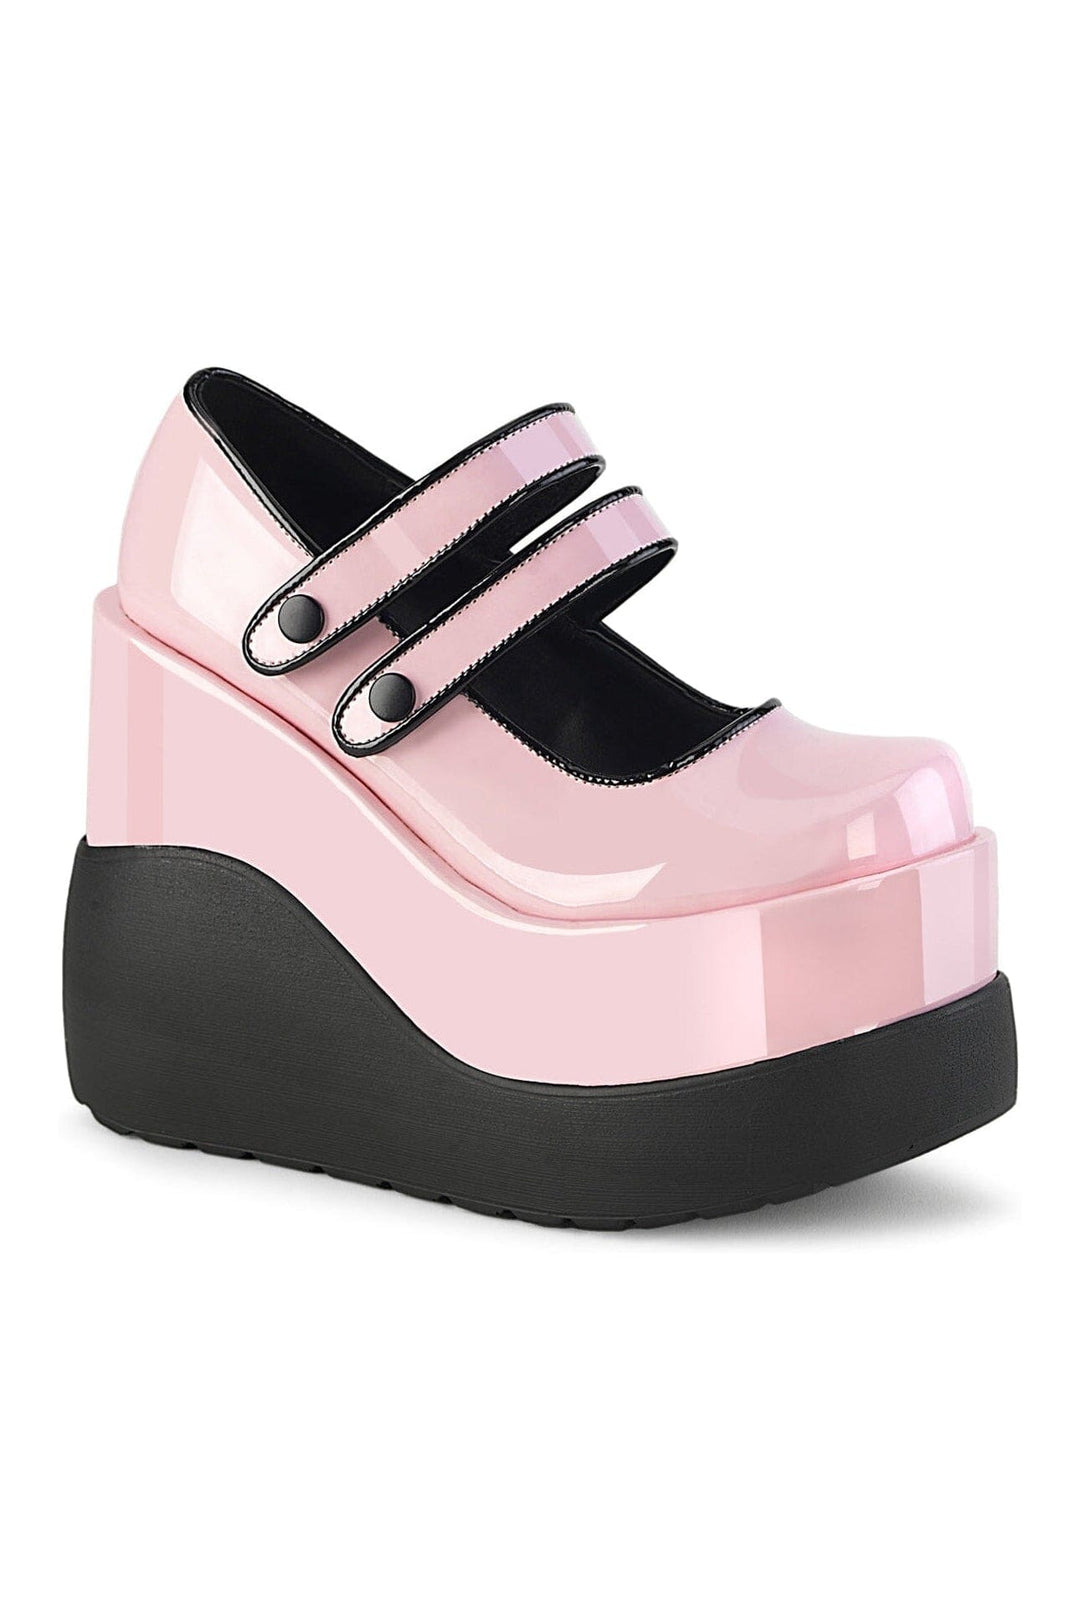 VOID-37 Pink Hologram Patent Mary Janes-Mary Janes-Demonia-Pink-10-Hologram Patent-SEXYSHOES.COM